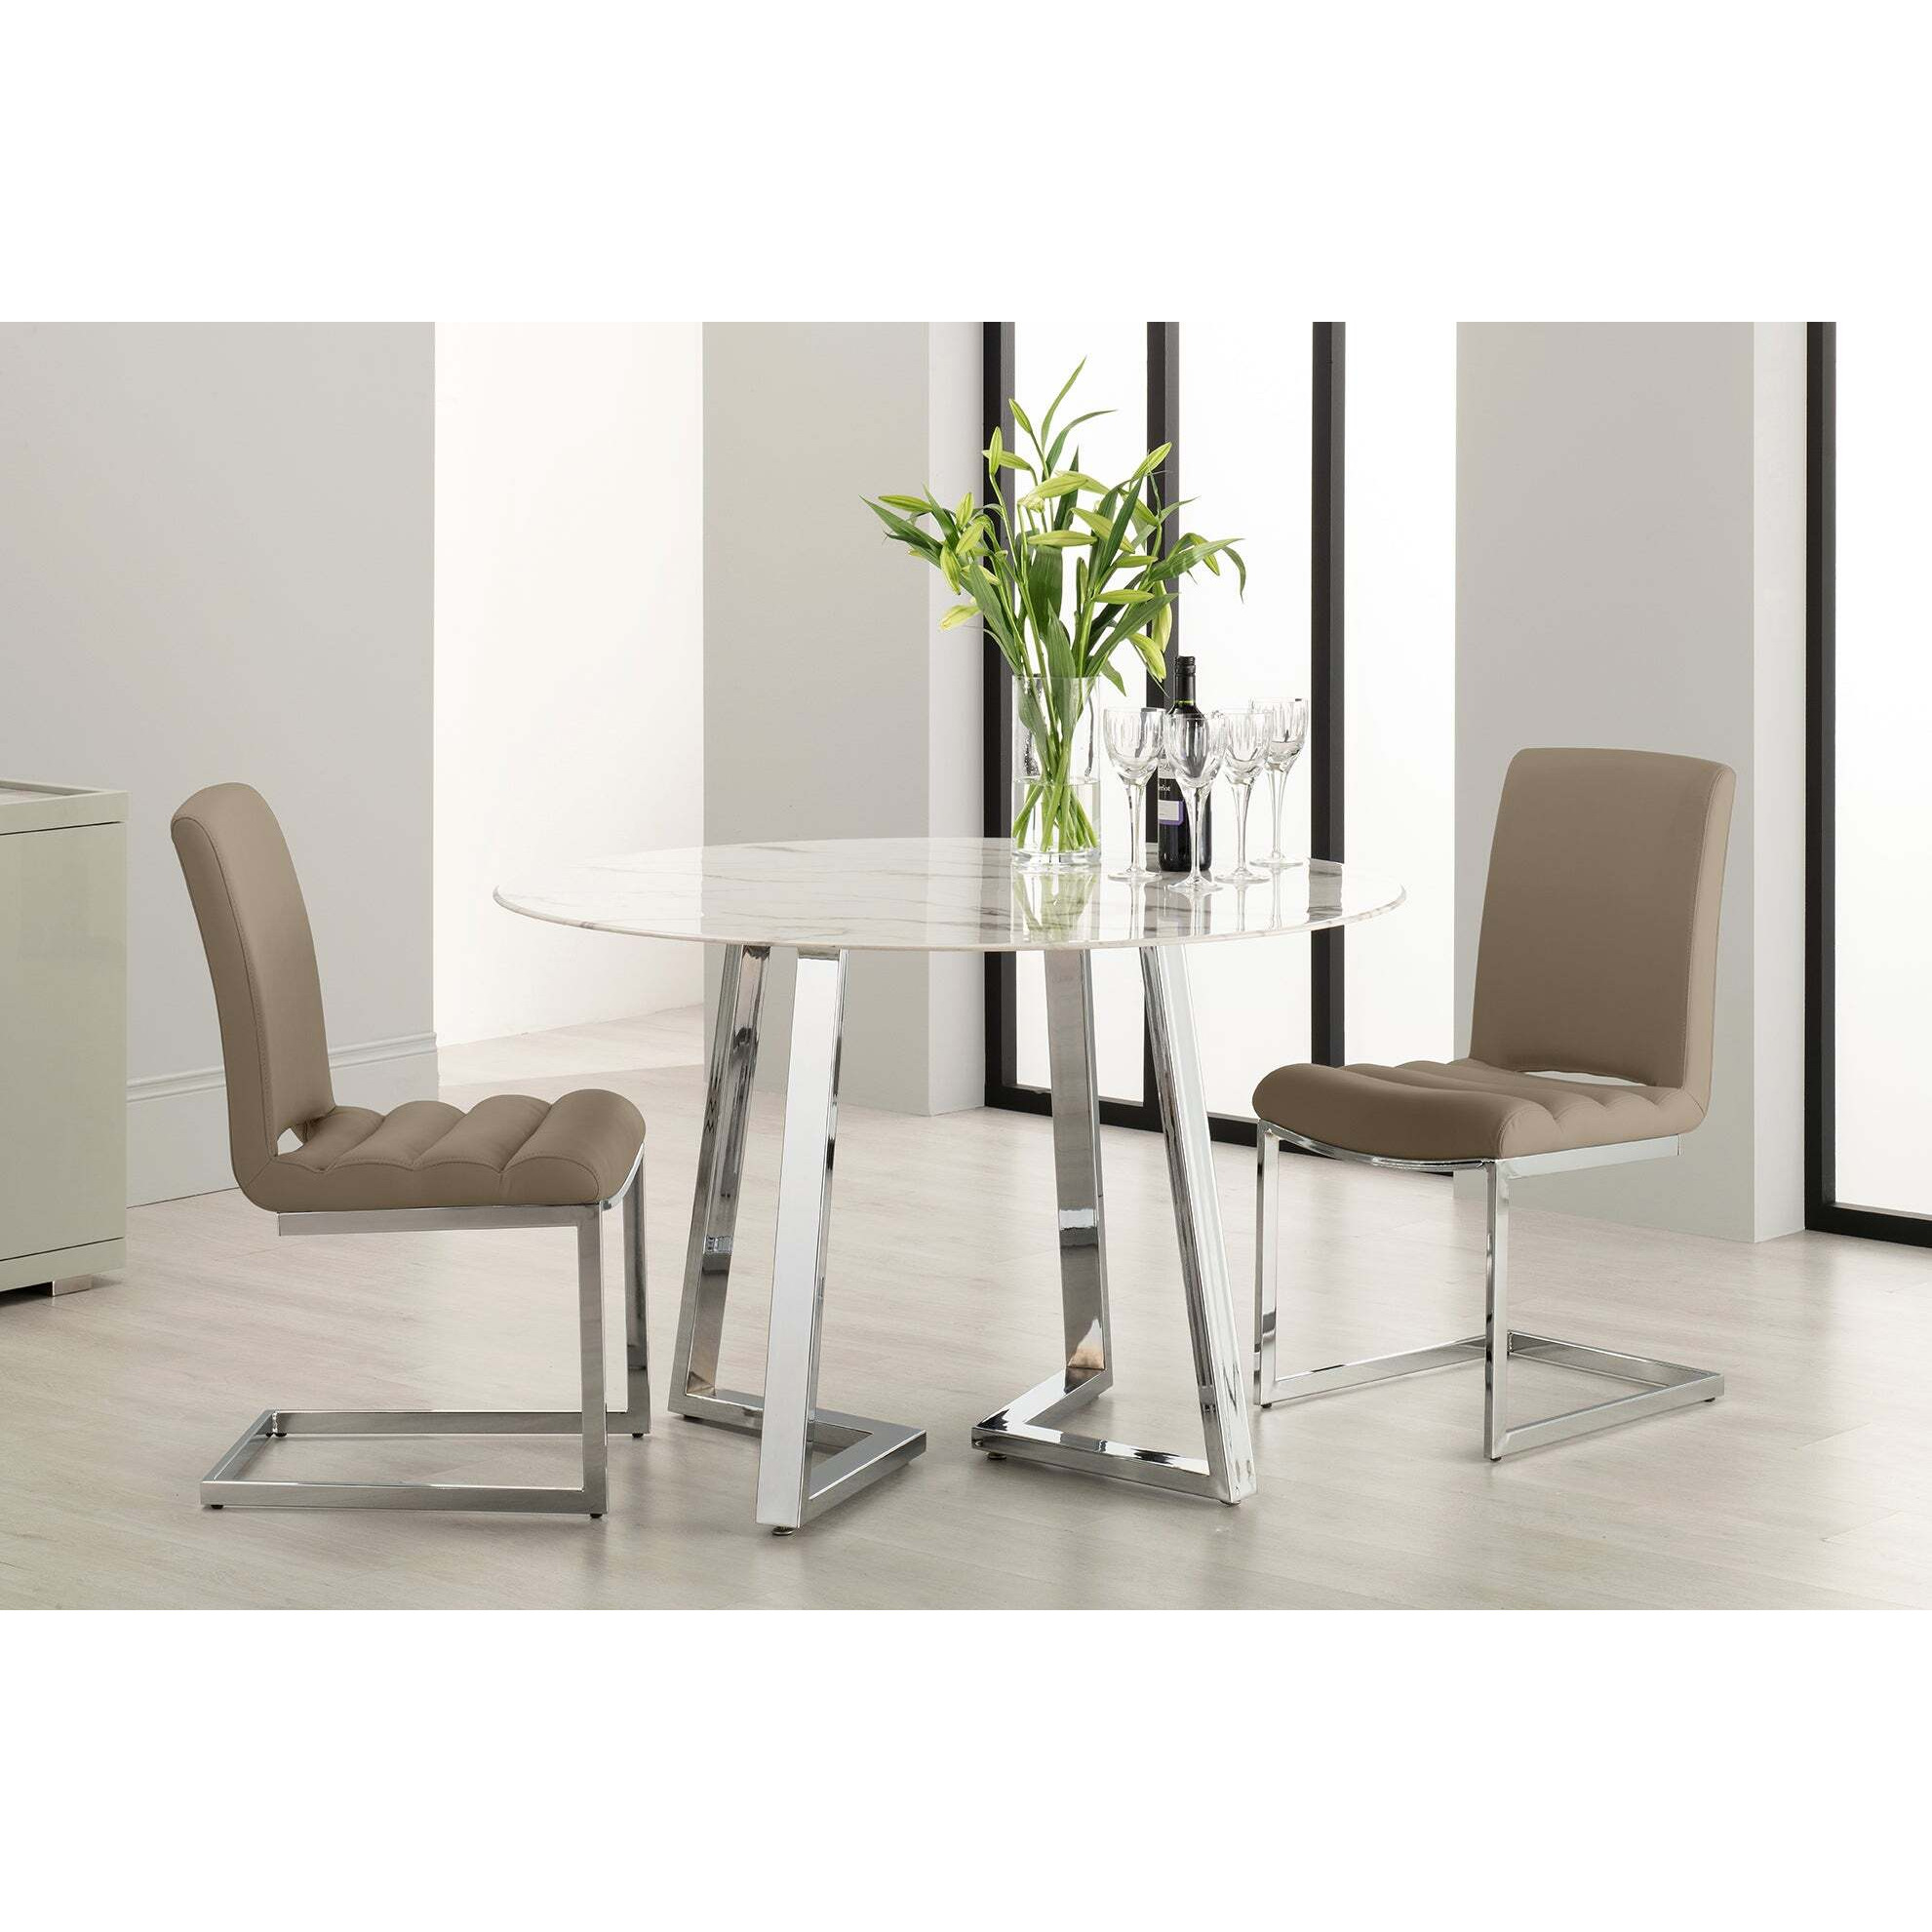 Storm 5 Piece Dining Table Set - Taupe